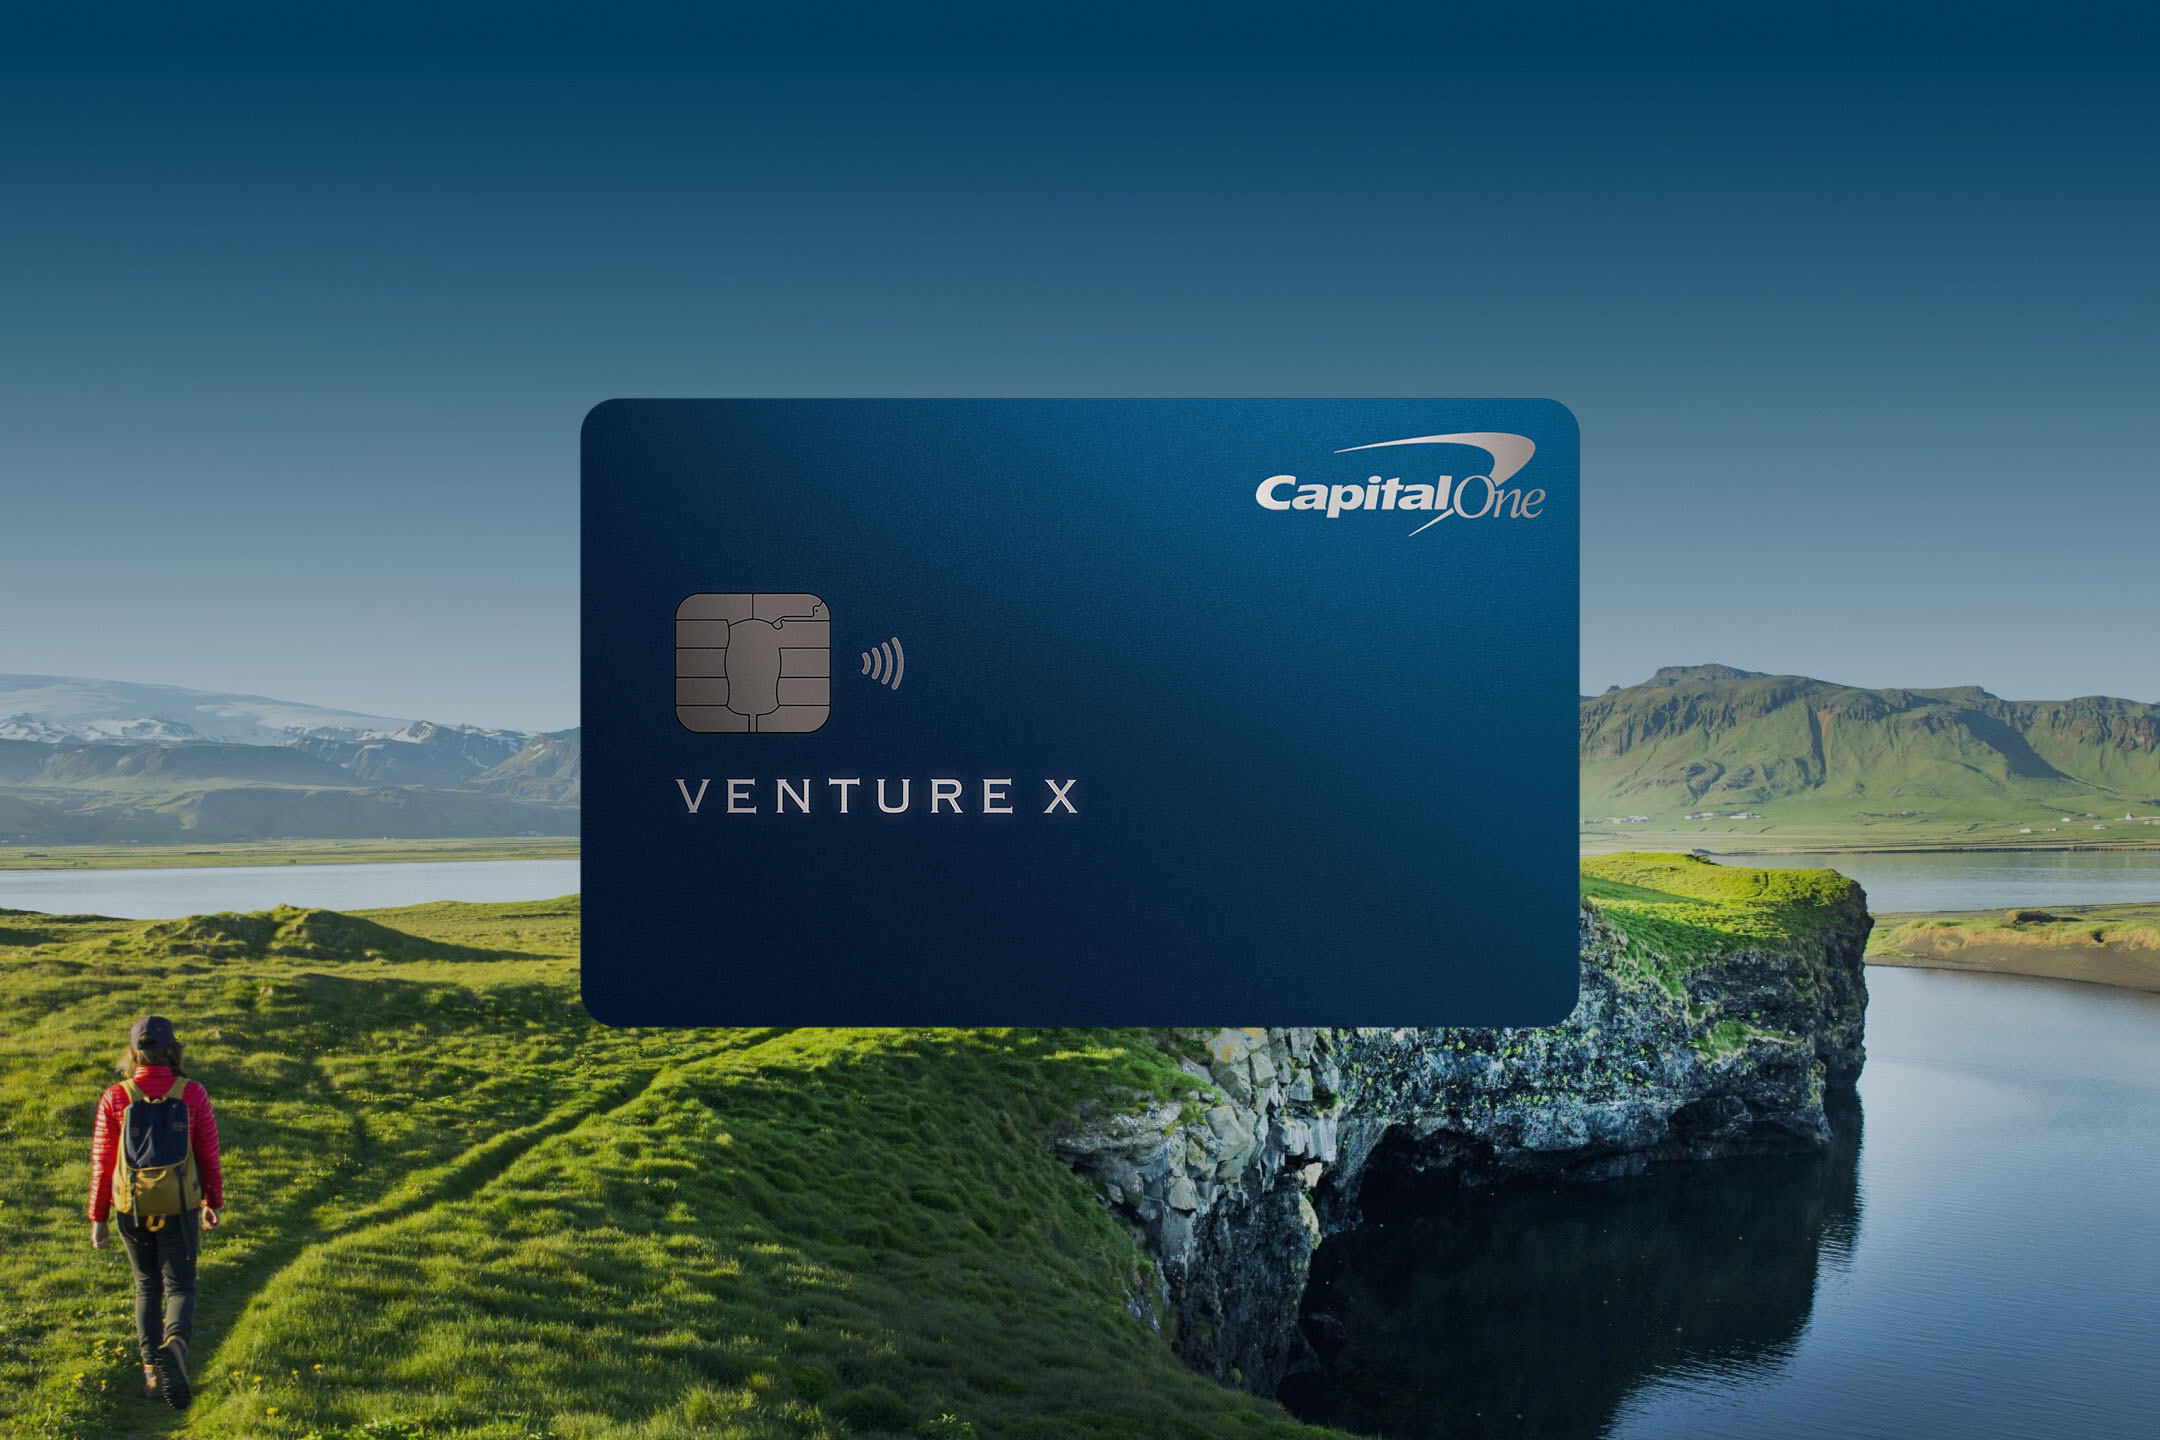 Getting Approved For Capital One Venture X The Story So Far